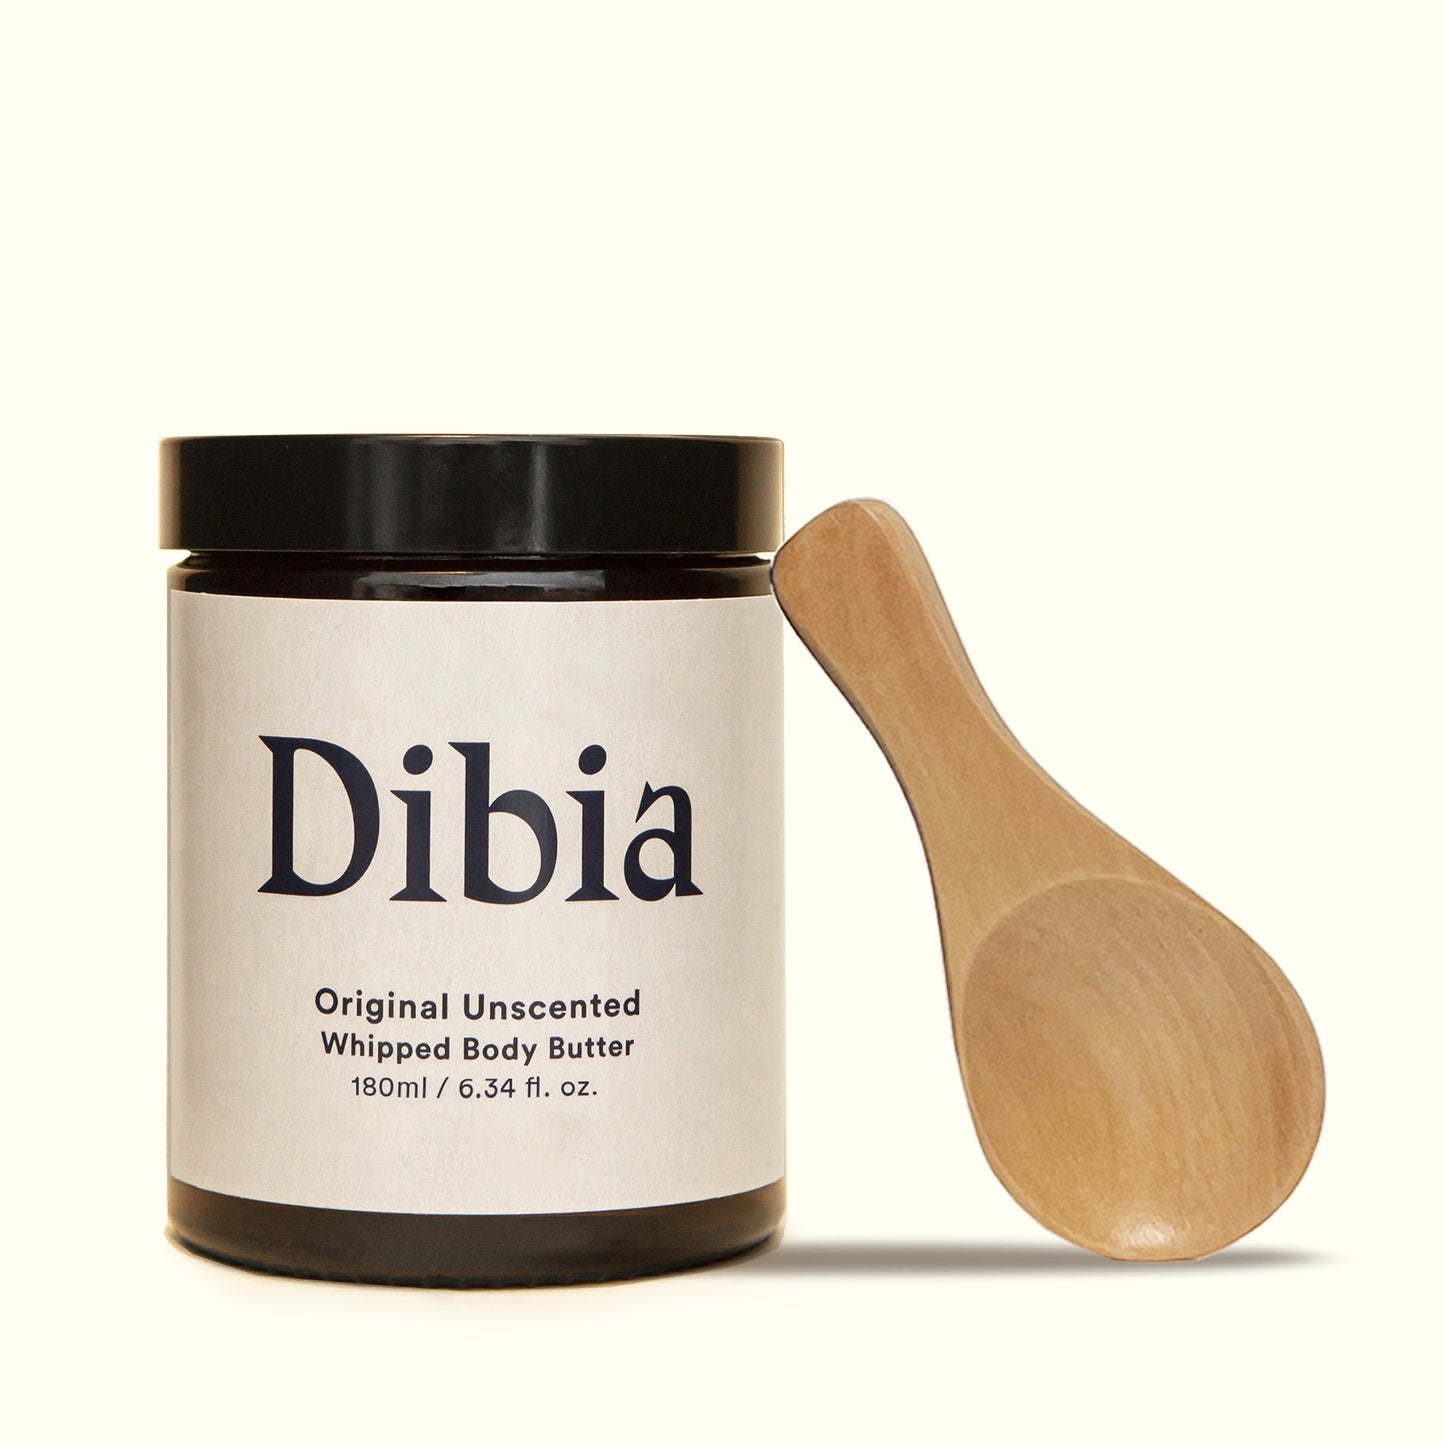 Jar of Dibia Original Unscented Whipped Body Butter 180ml with wooden scoop balanced on its side